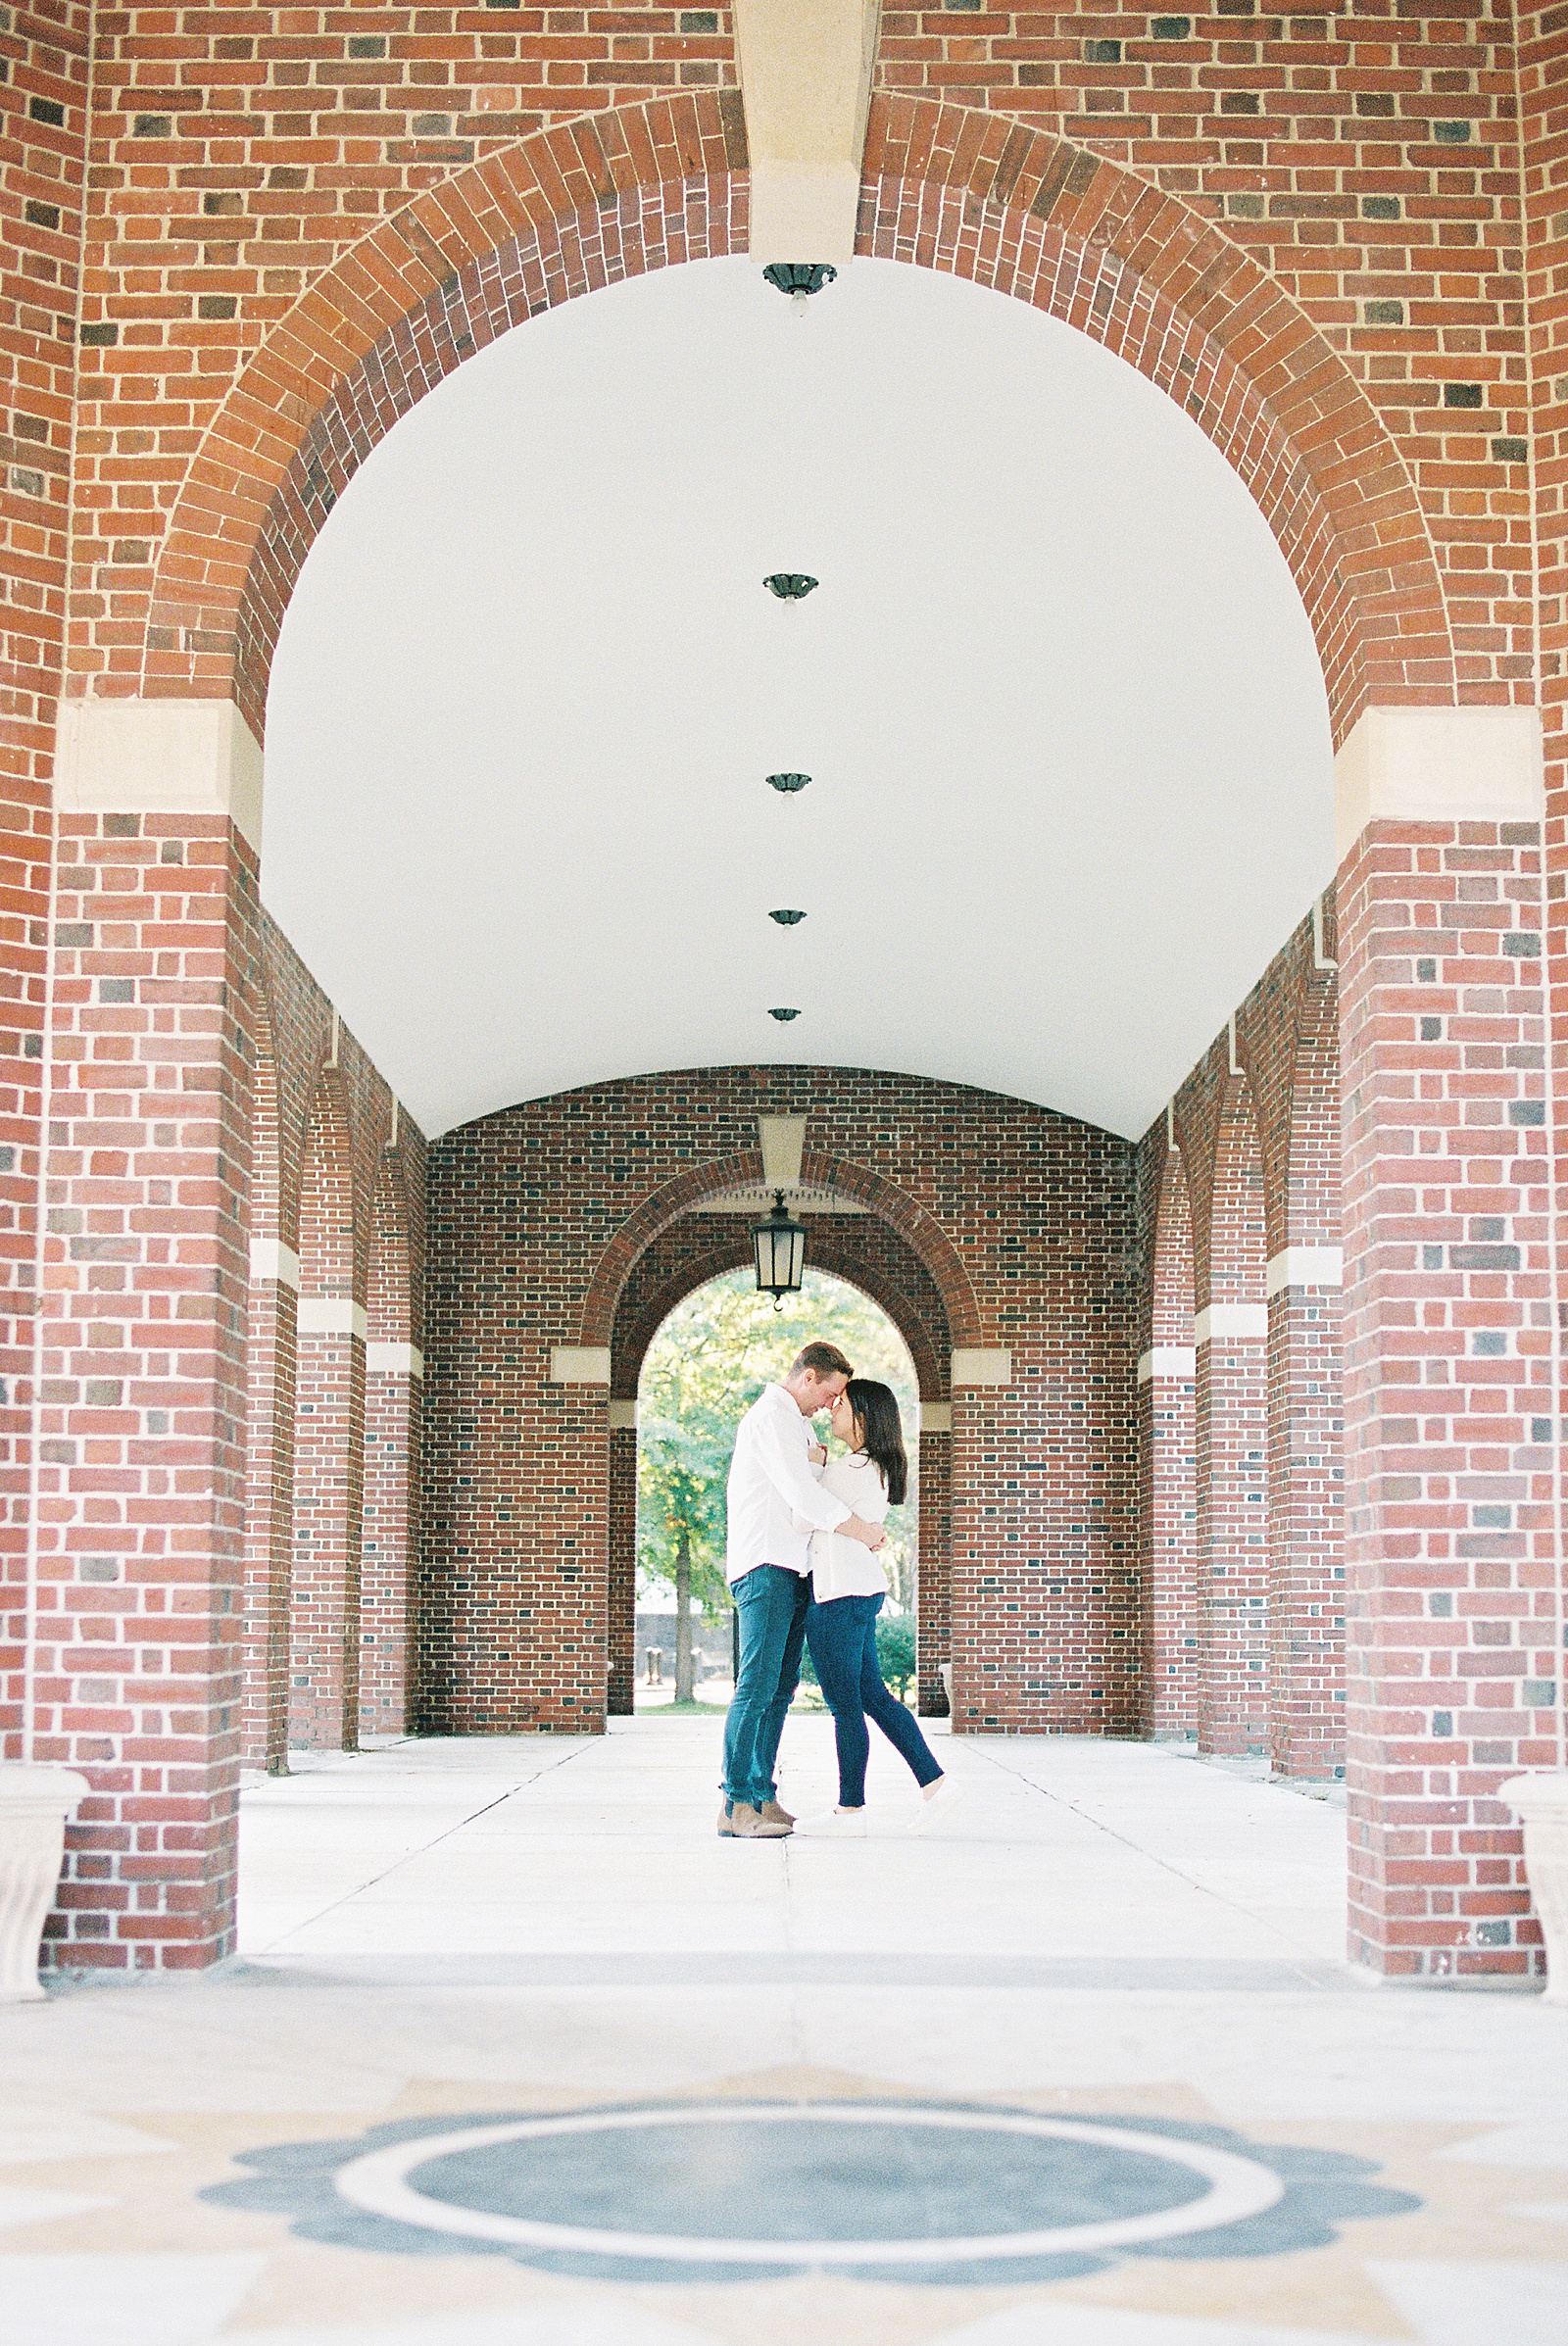 Couple embracing in the archway of a red brick hallway for photo shoot 